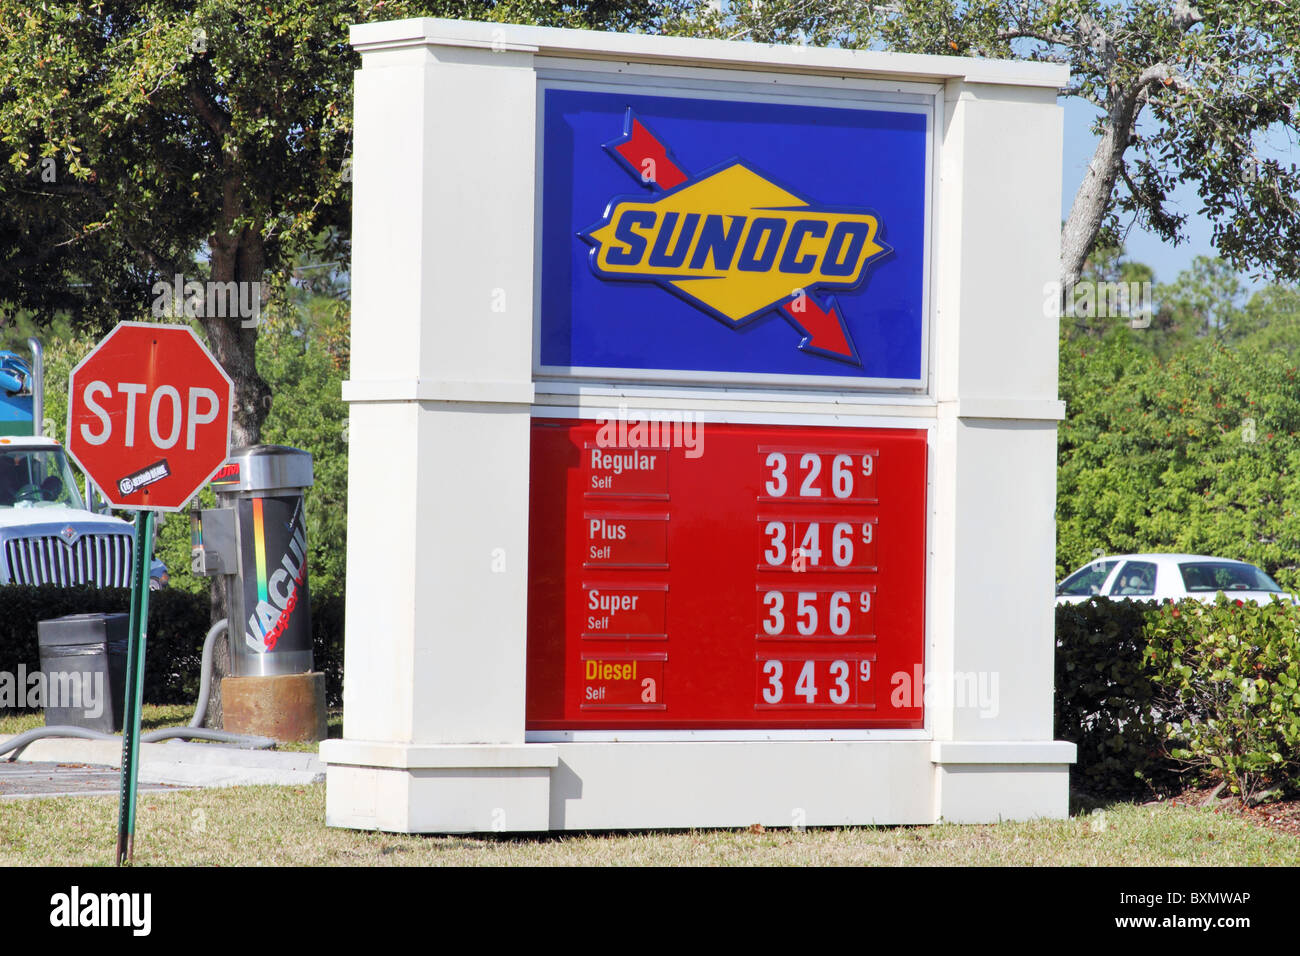 Sunoco gas station with gas prices on sign. West Palm Beach, FL, USA. December 23, 2010. Stock Photo